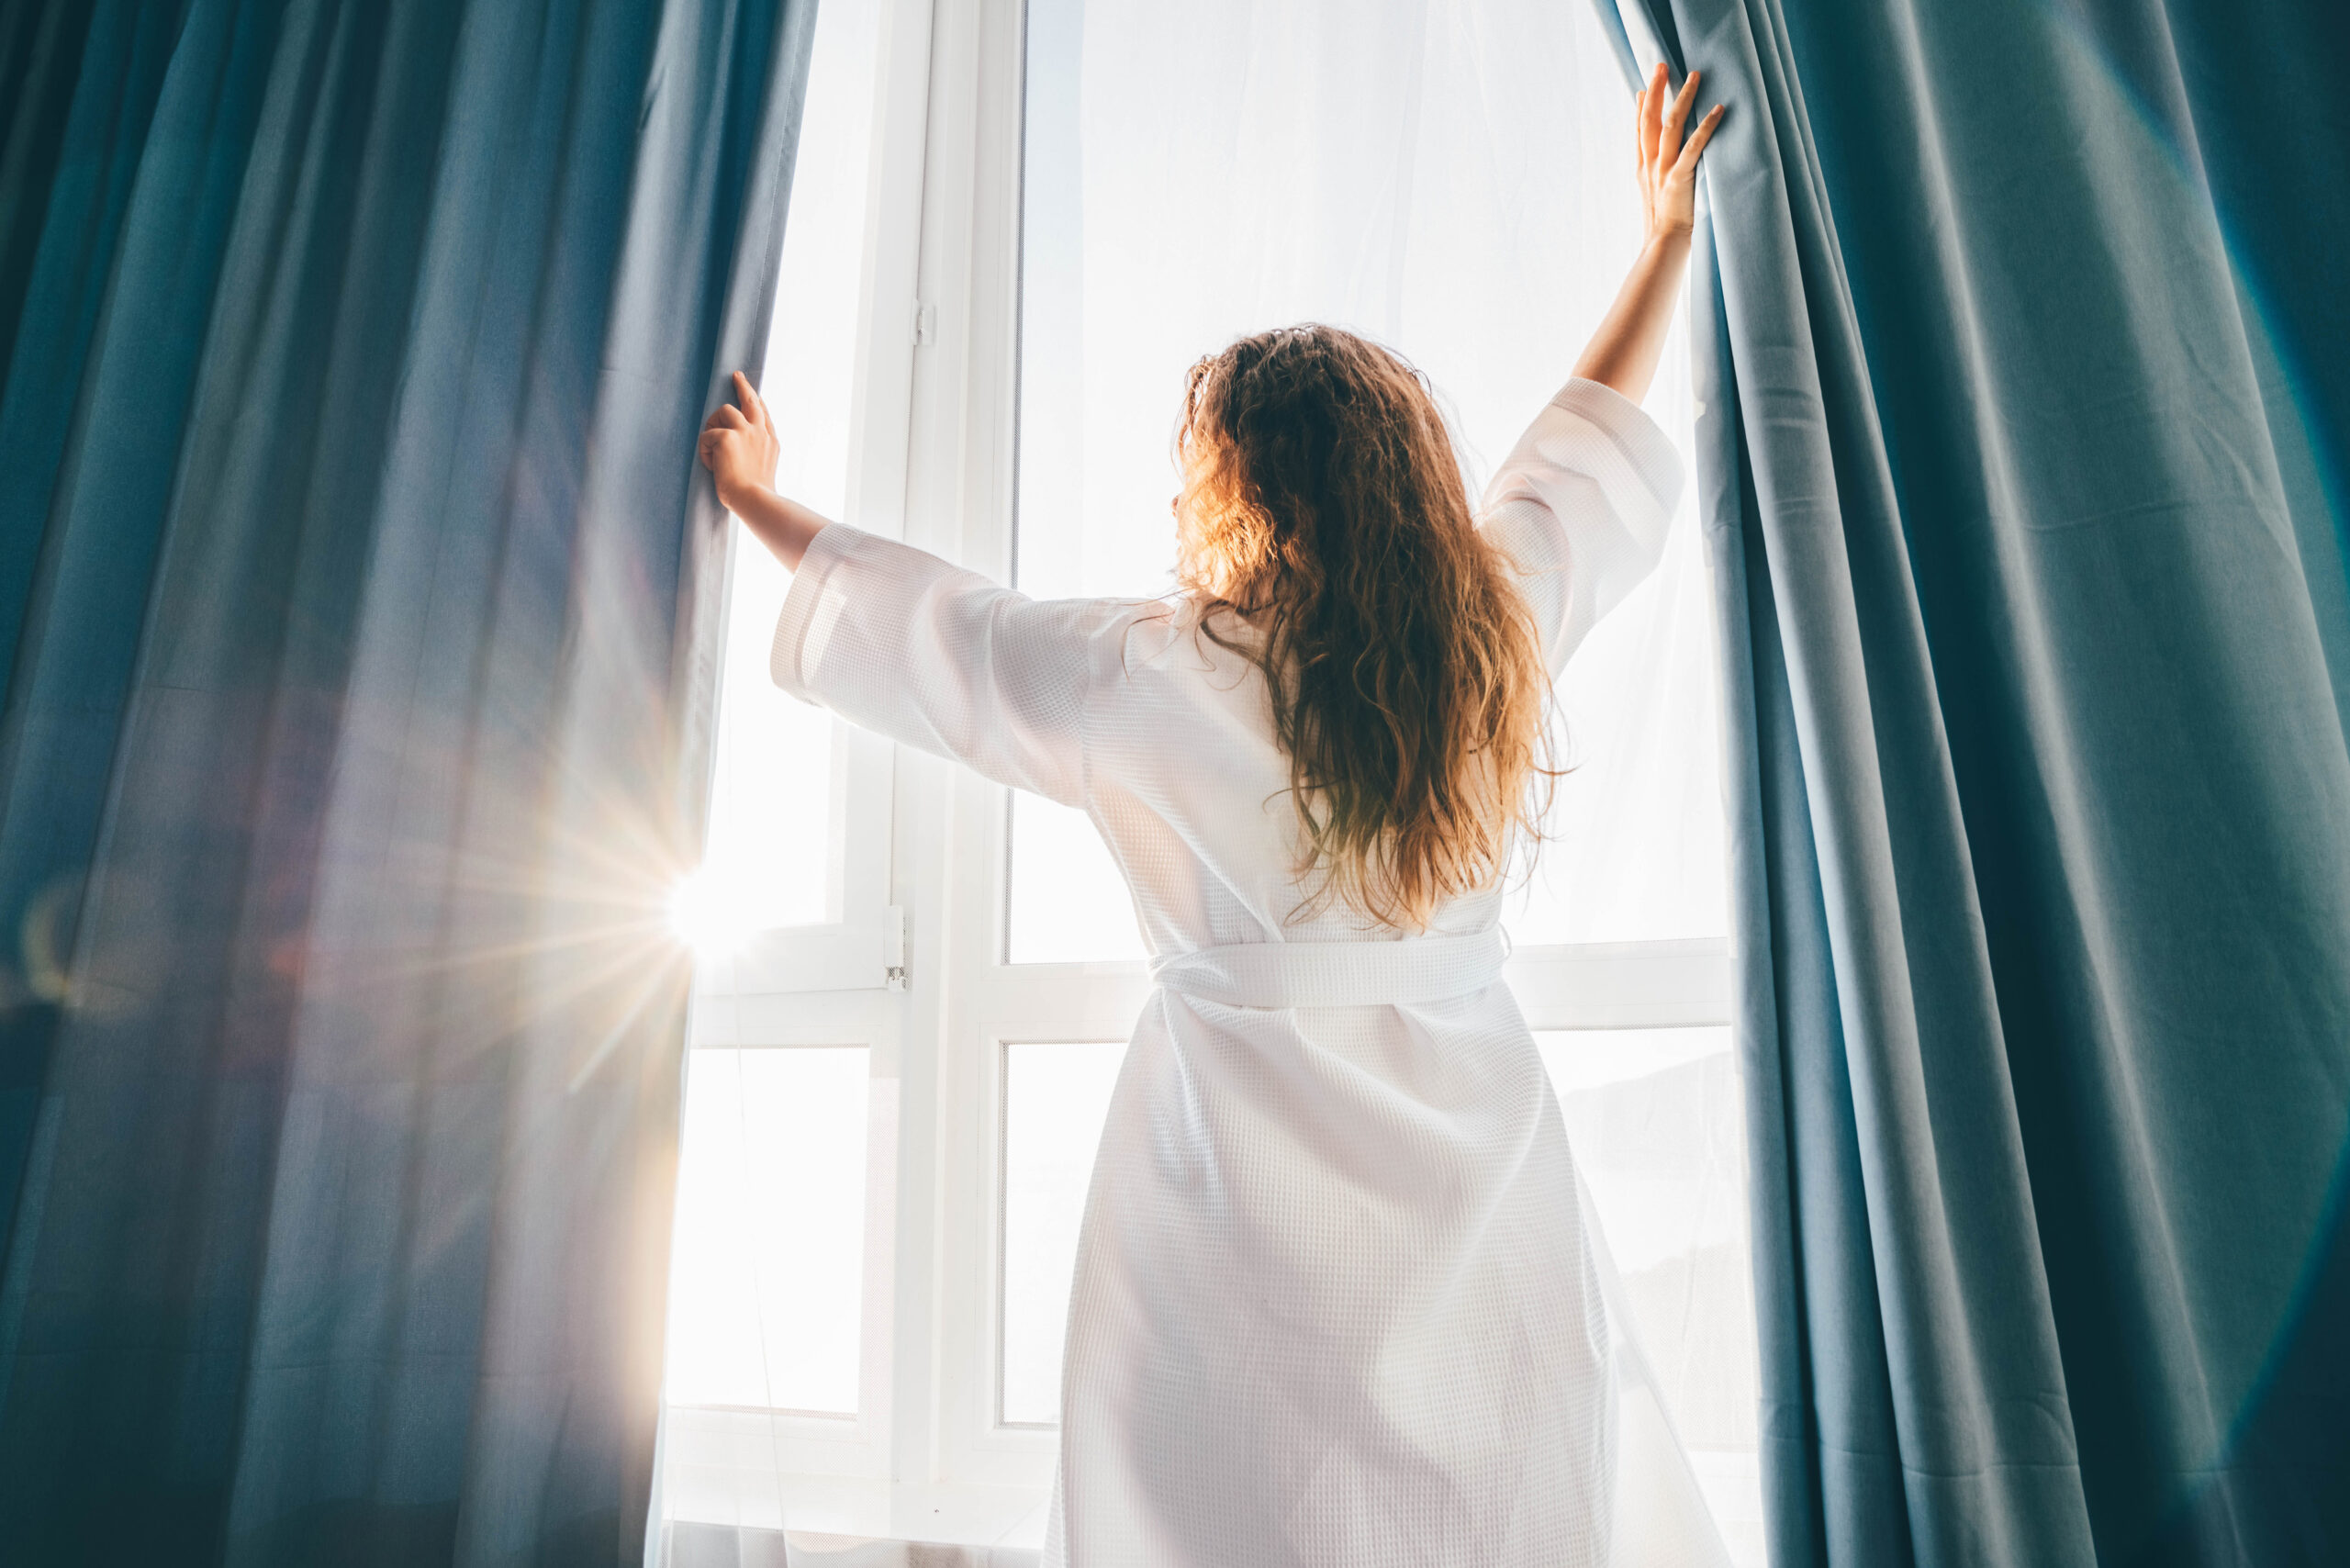 Woman-in-bathrobe-opening-curtains